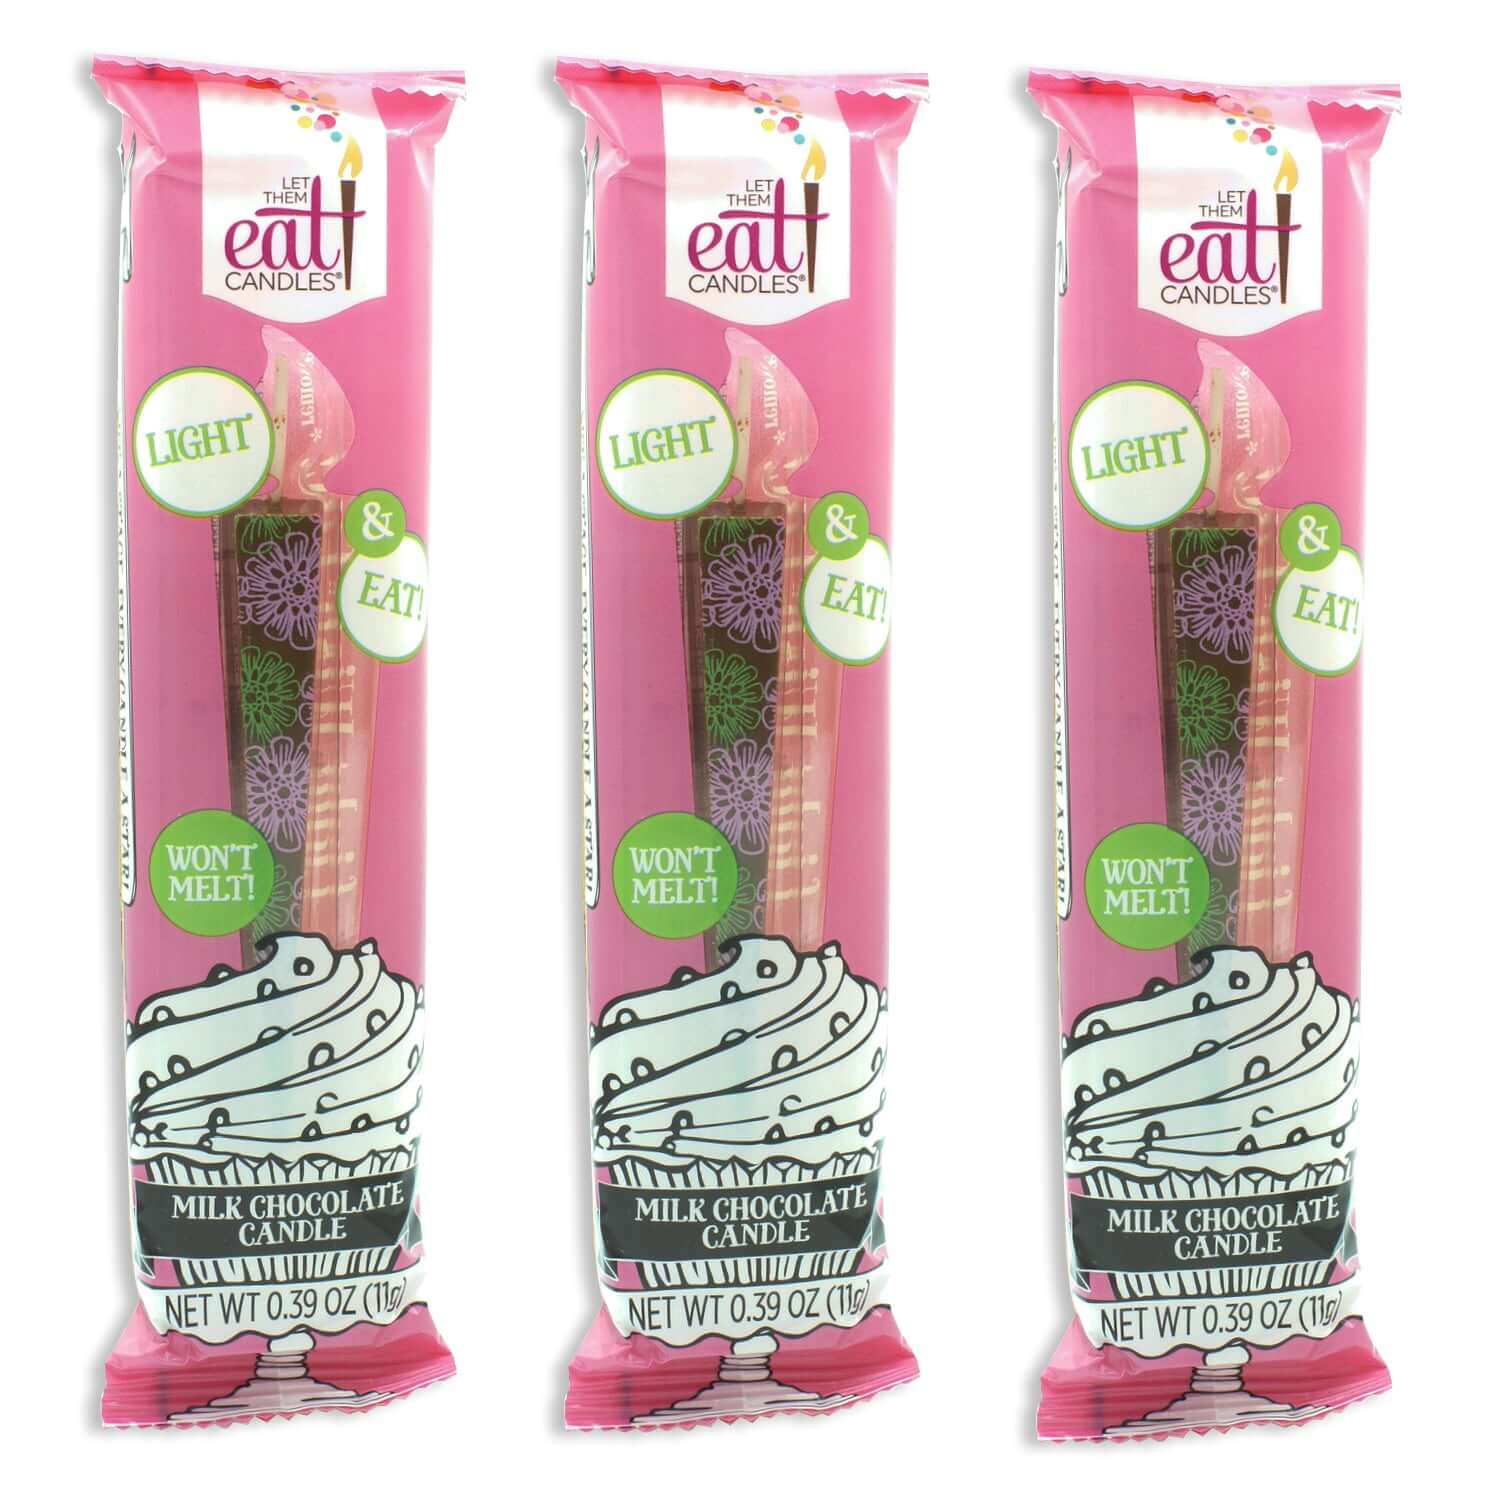 3 Edible Milk Chocolate Candles with Pink/Green Flowers  Individually Packaged | Let Them Eat Candles